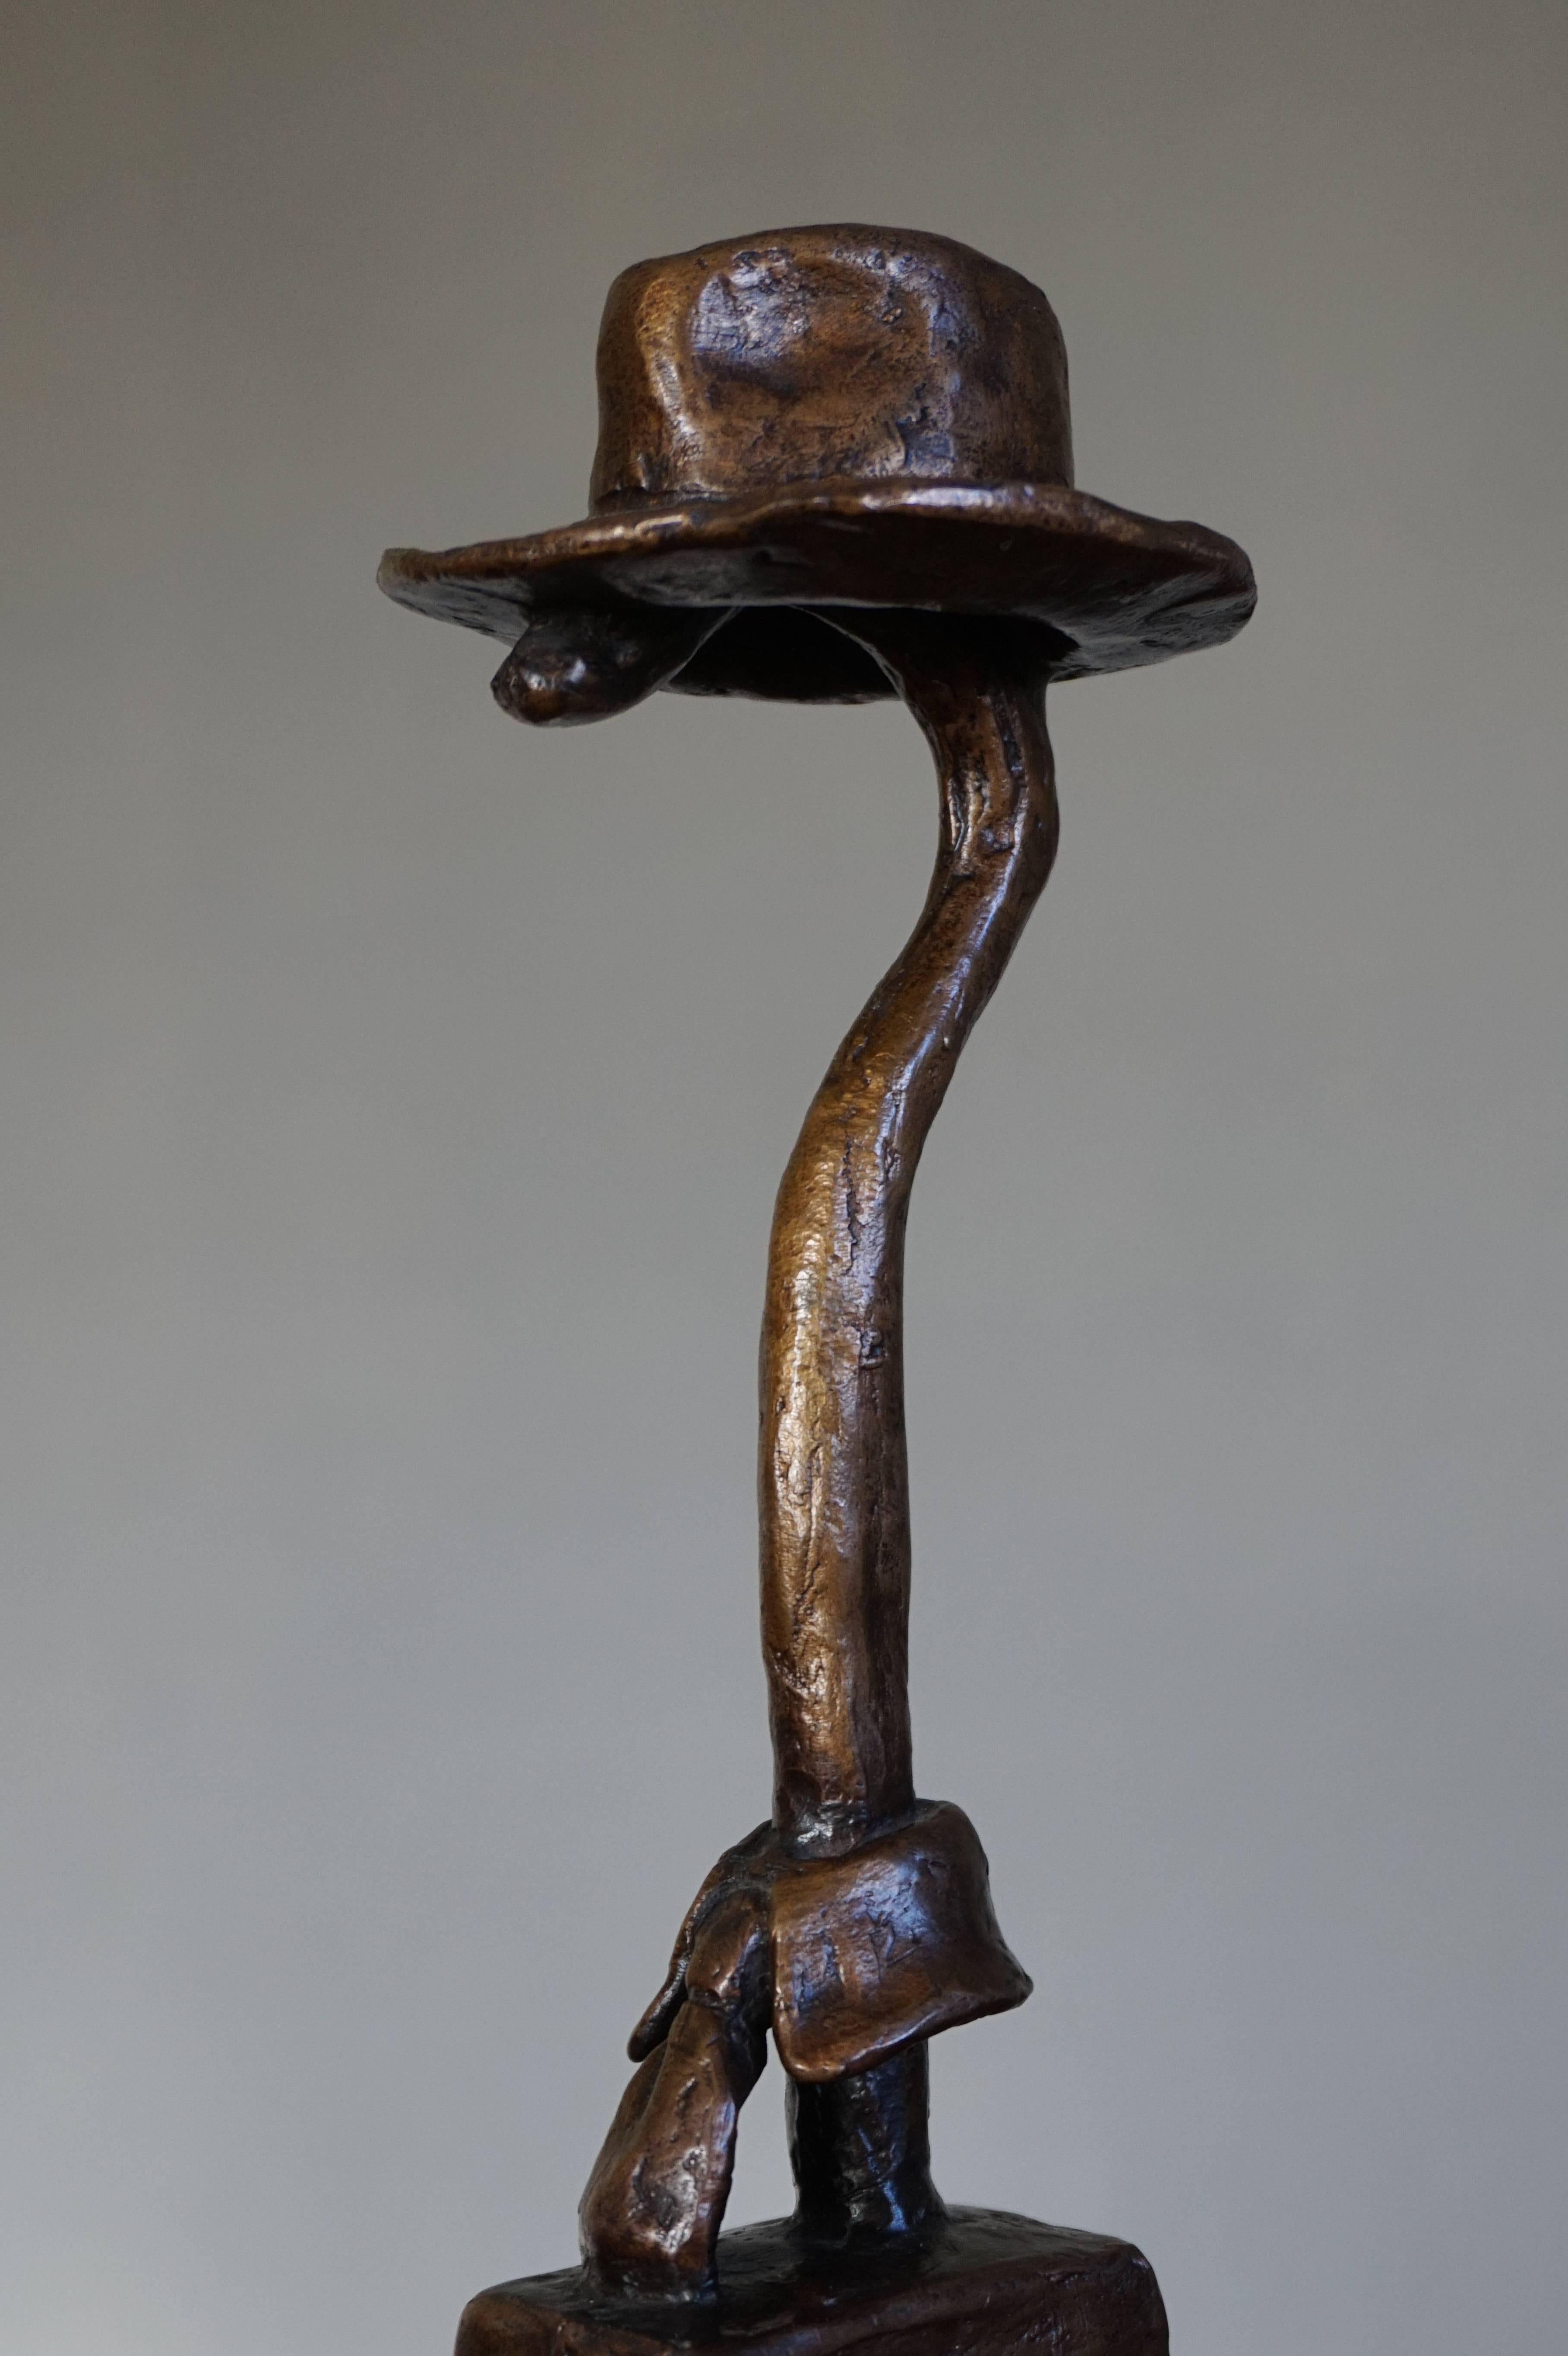 Unique Bronze Fashion Sculpture of Walking Cane in a Hat with Colar & Tie 1